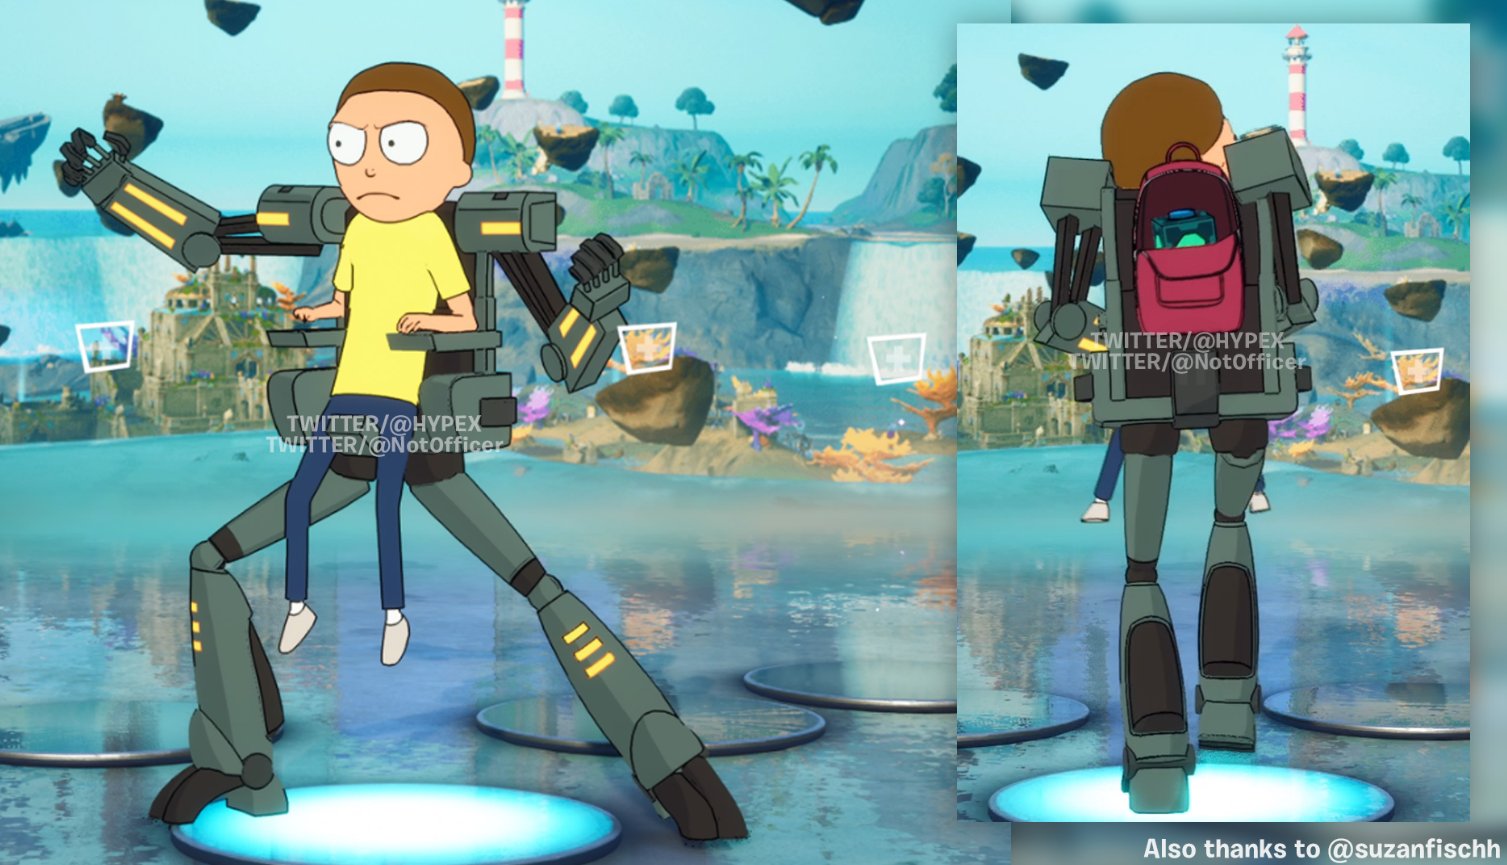 Morty from Rick and Morty series in Fortnite 